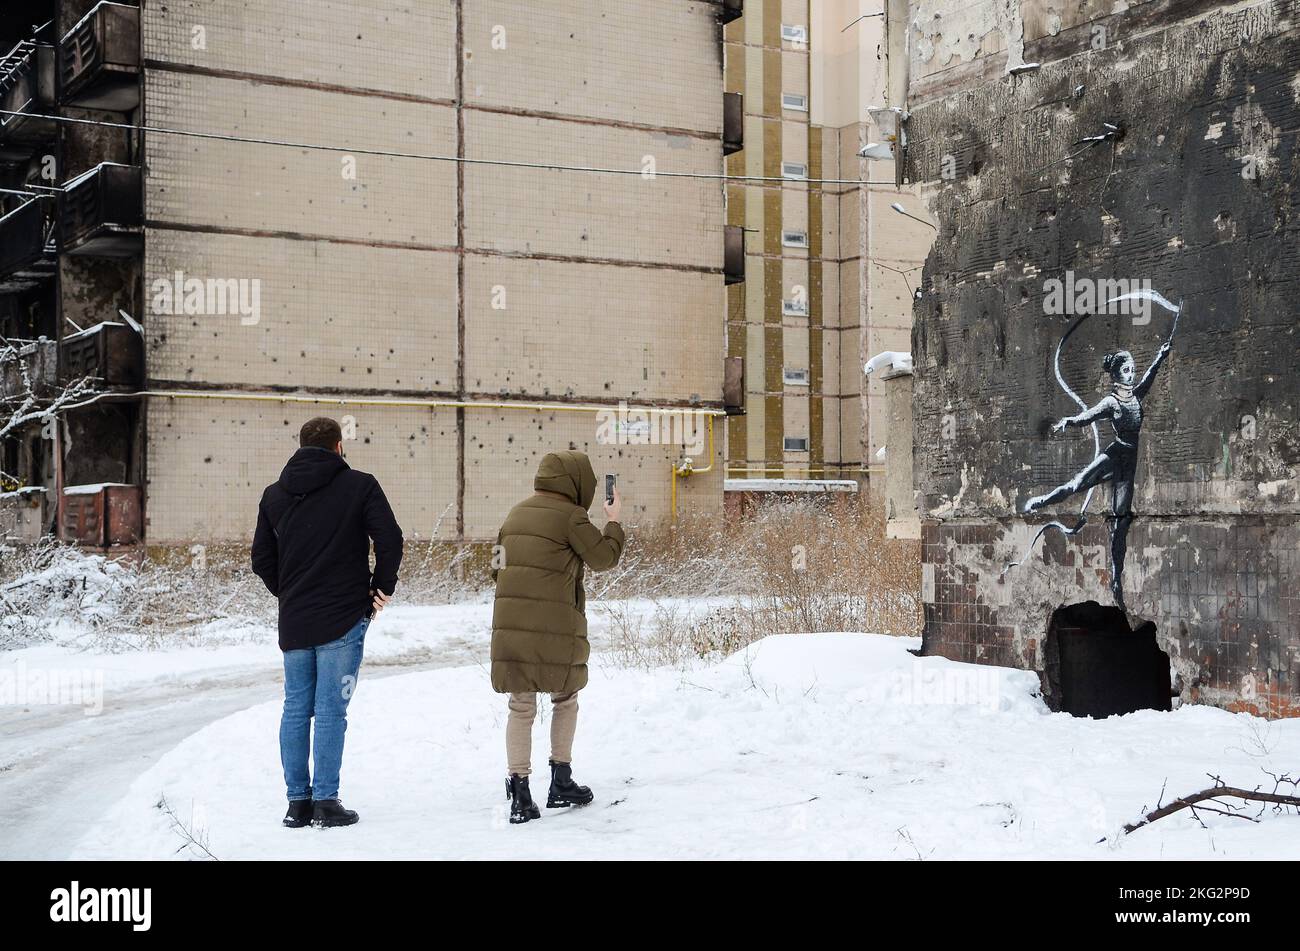 Non Exclusive: IRPIN, UKRAINE - NOVEMBER 19, 2022 - A woman takes a picture of the mural created by England-based street artist Banksy on the wall of Stock Photo